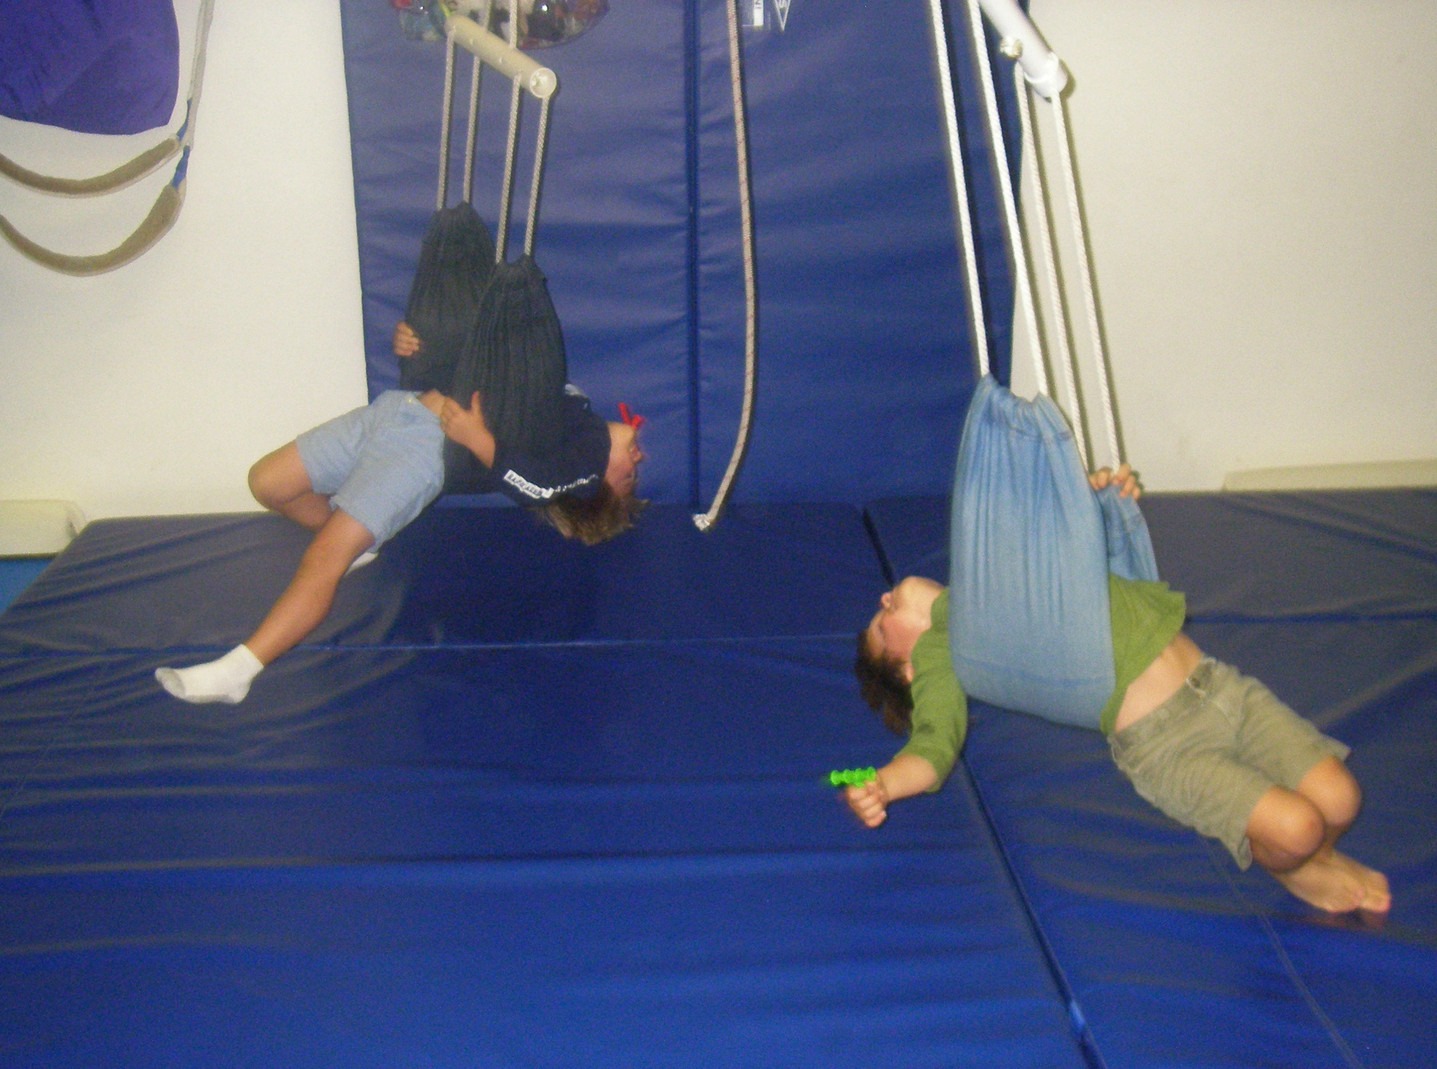 Two people hanging from a rope on a blue wall.